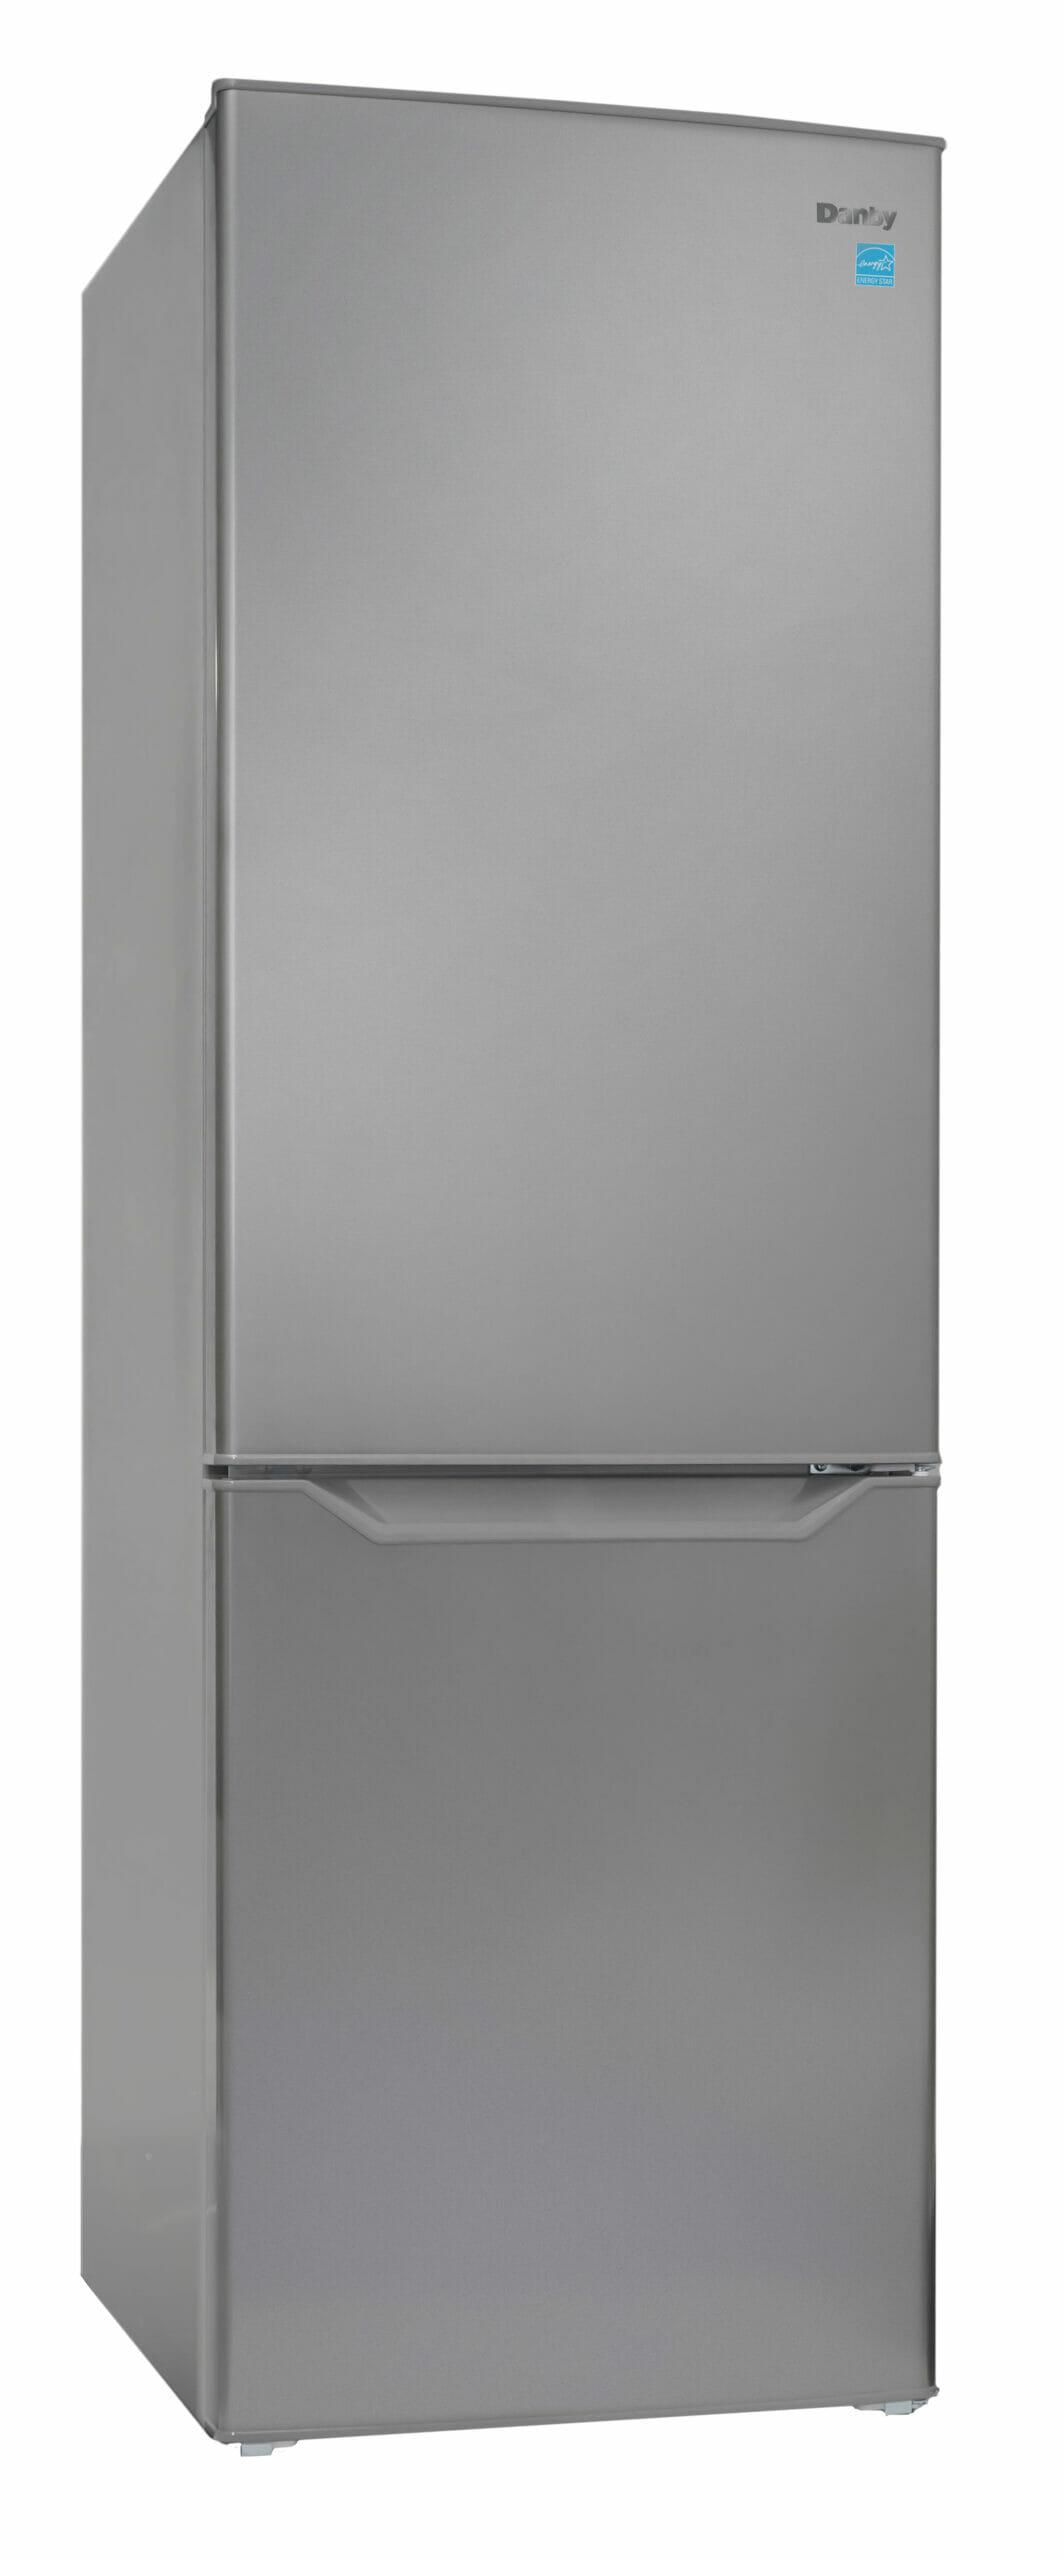 Danby 10.3 cu. ft. Bottom Mount Apartment Size Fridge in Stainless Steel